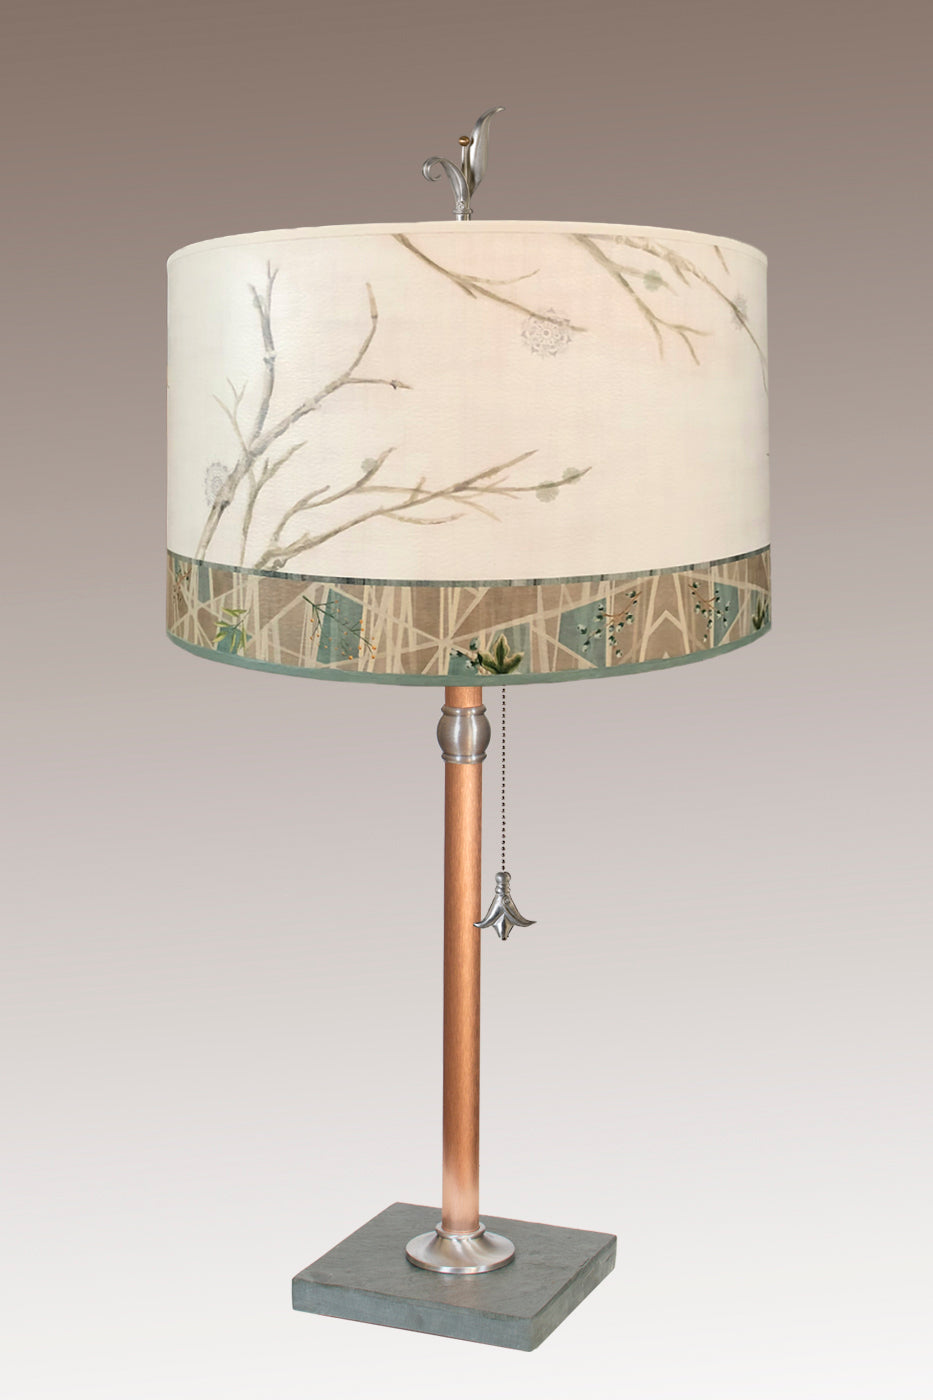 Janna Ugone & Co Table Lamps Copper Table Lamp with Large Drum Shade in Prism Branch